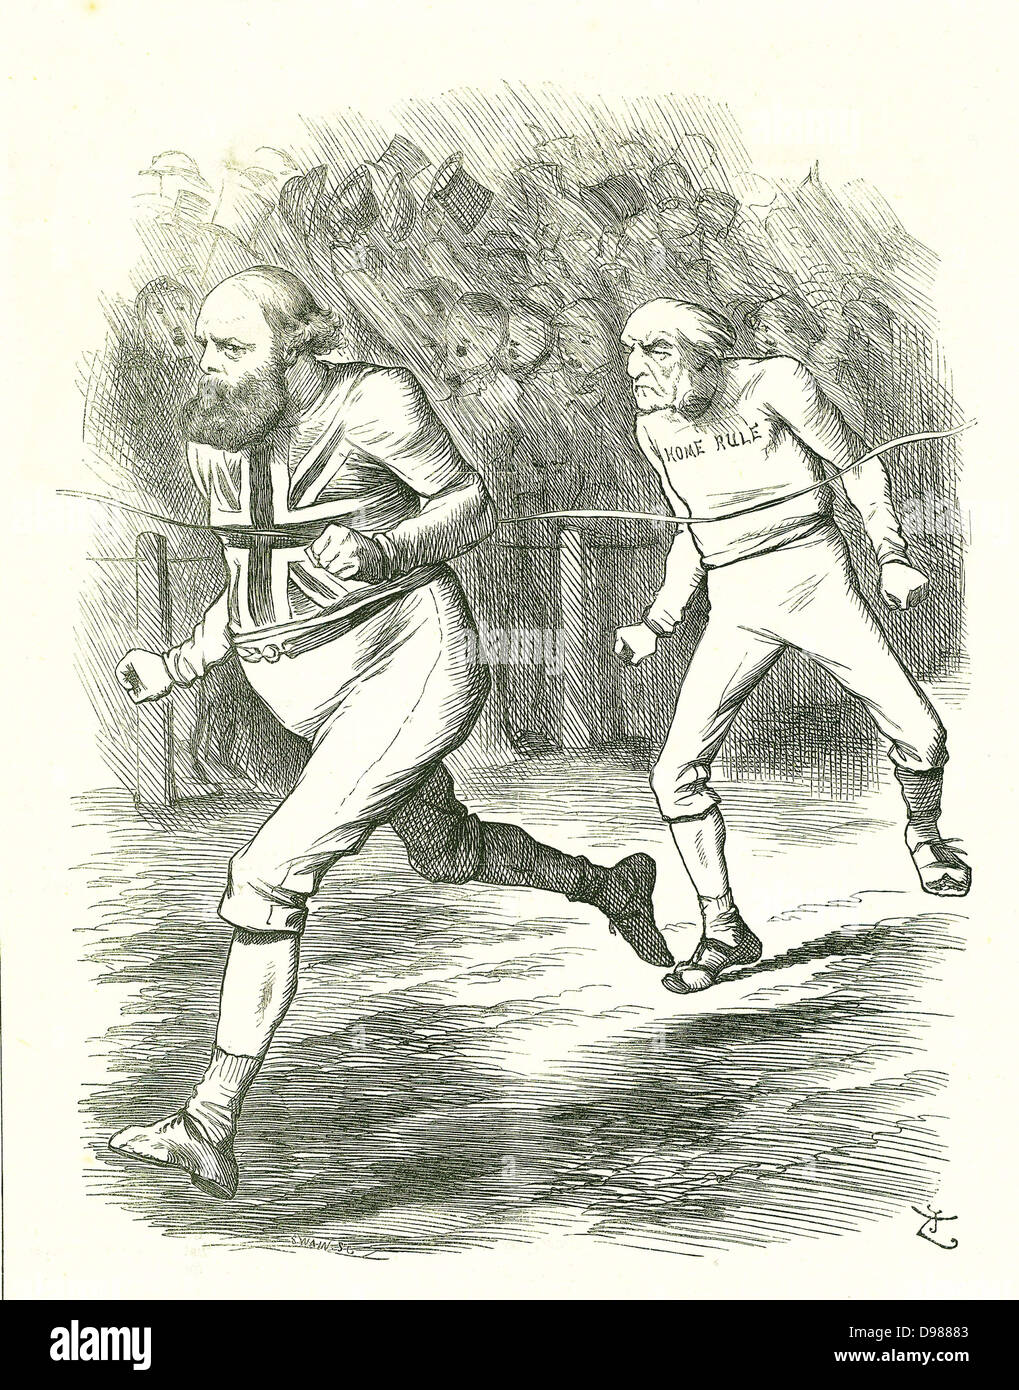 The Finish': General Election 1886. Gladstone (Liberal) went to the country over his Home Rule for Ireland bill. Salisbury (Conservative opposition) beats Gladstone to the finishing line . John Tenniel cartoon from 'Punch', London, 17 July 1886. Stock Photo